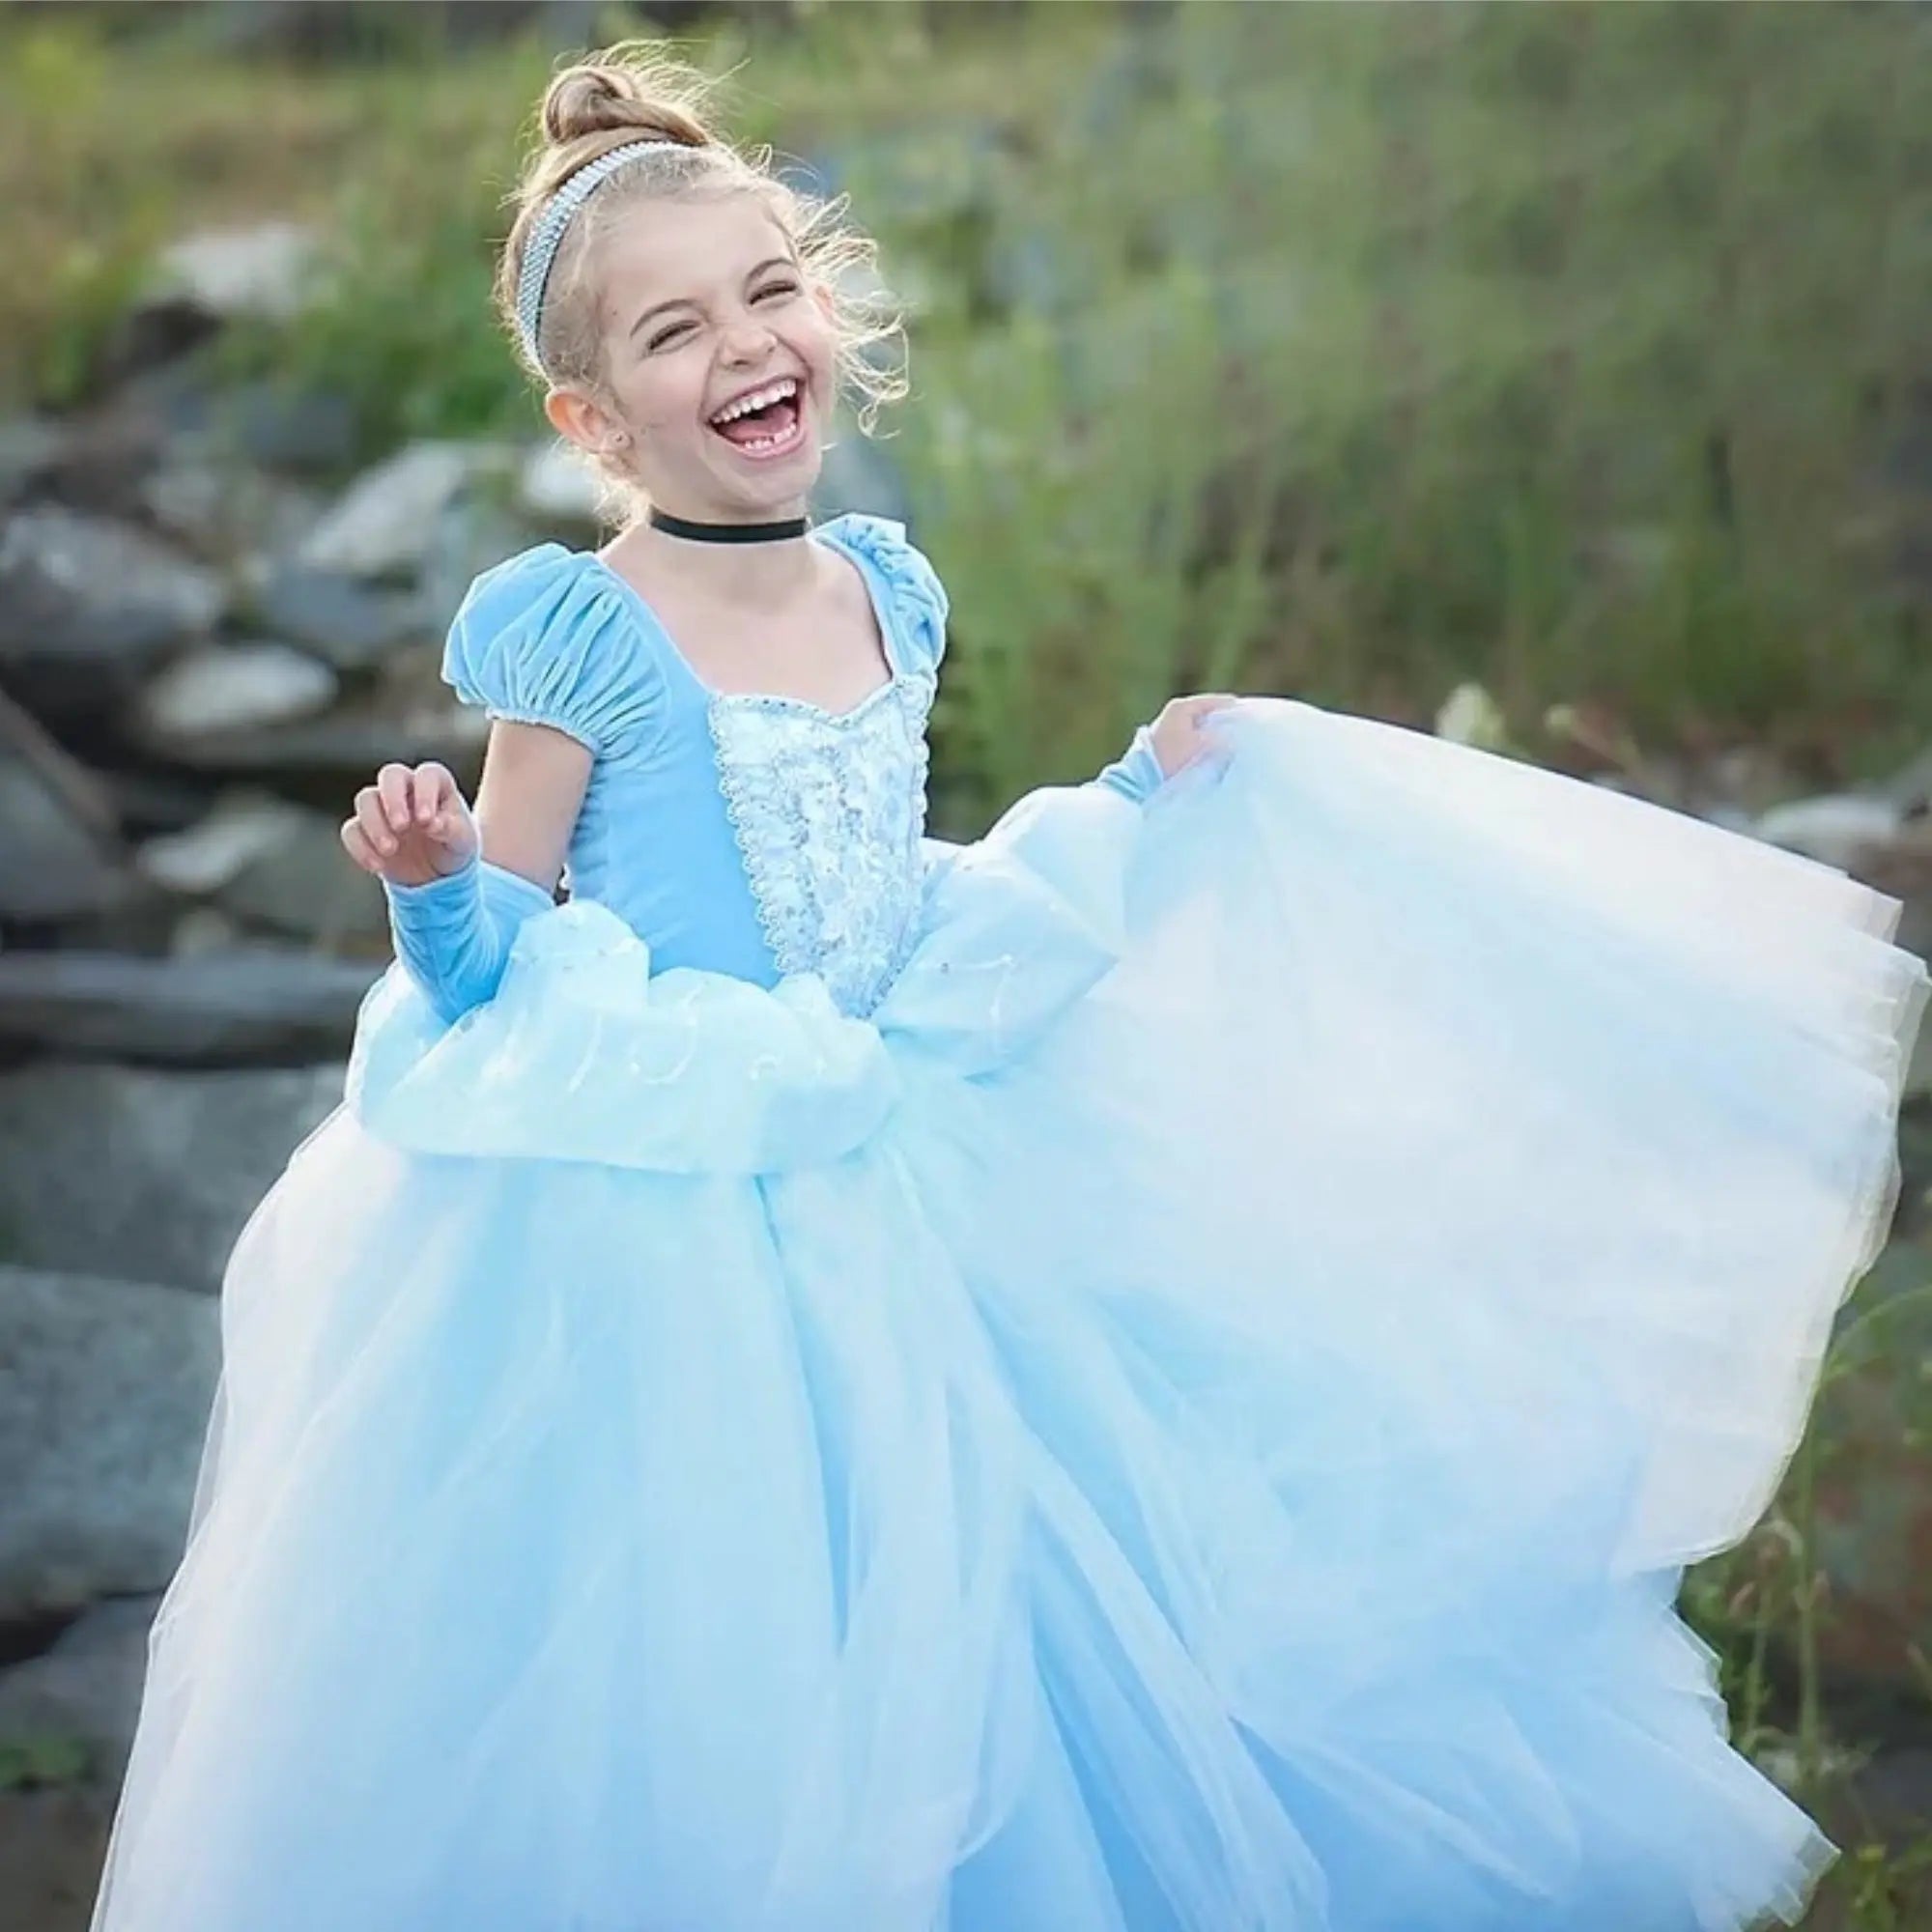 Girls Enchanting Cinderella Dress Halloween Costume with Accessories Bling Bling Baby Boutique